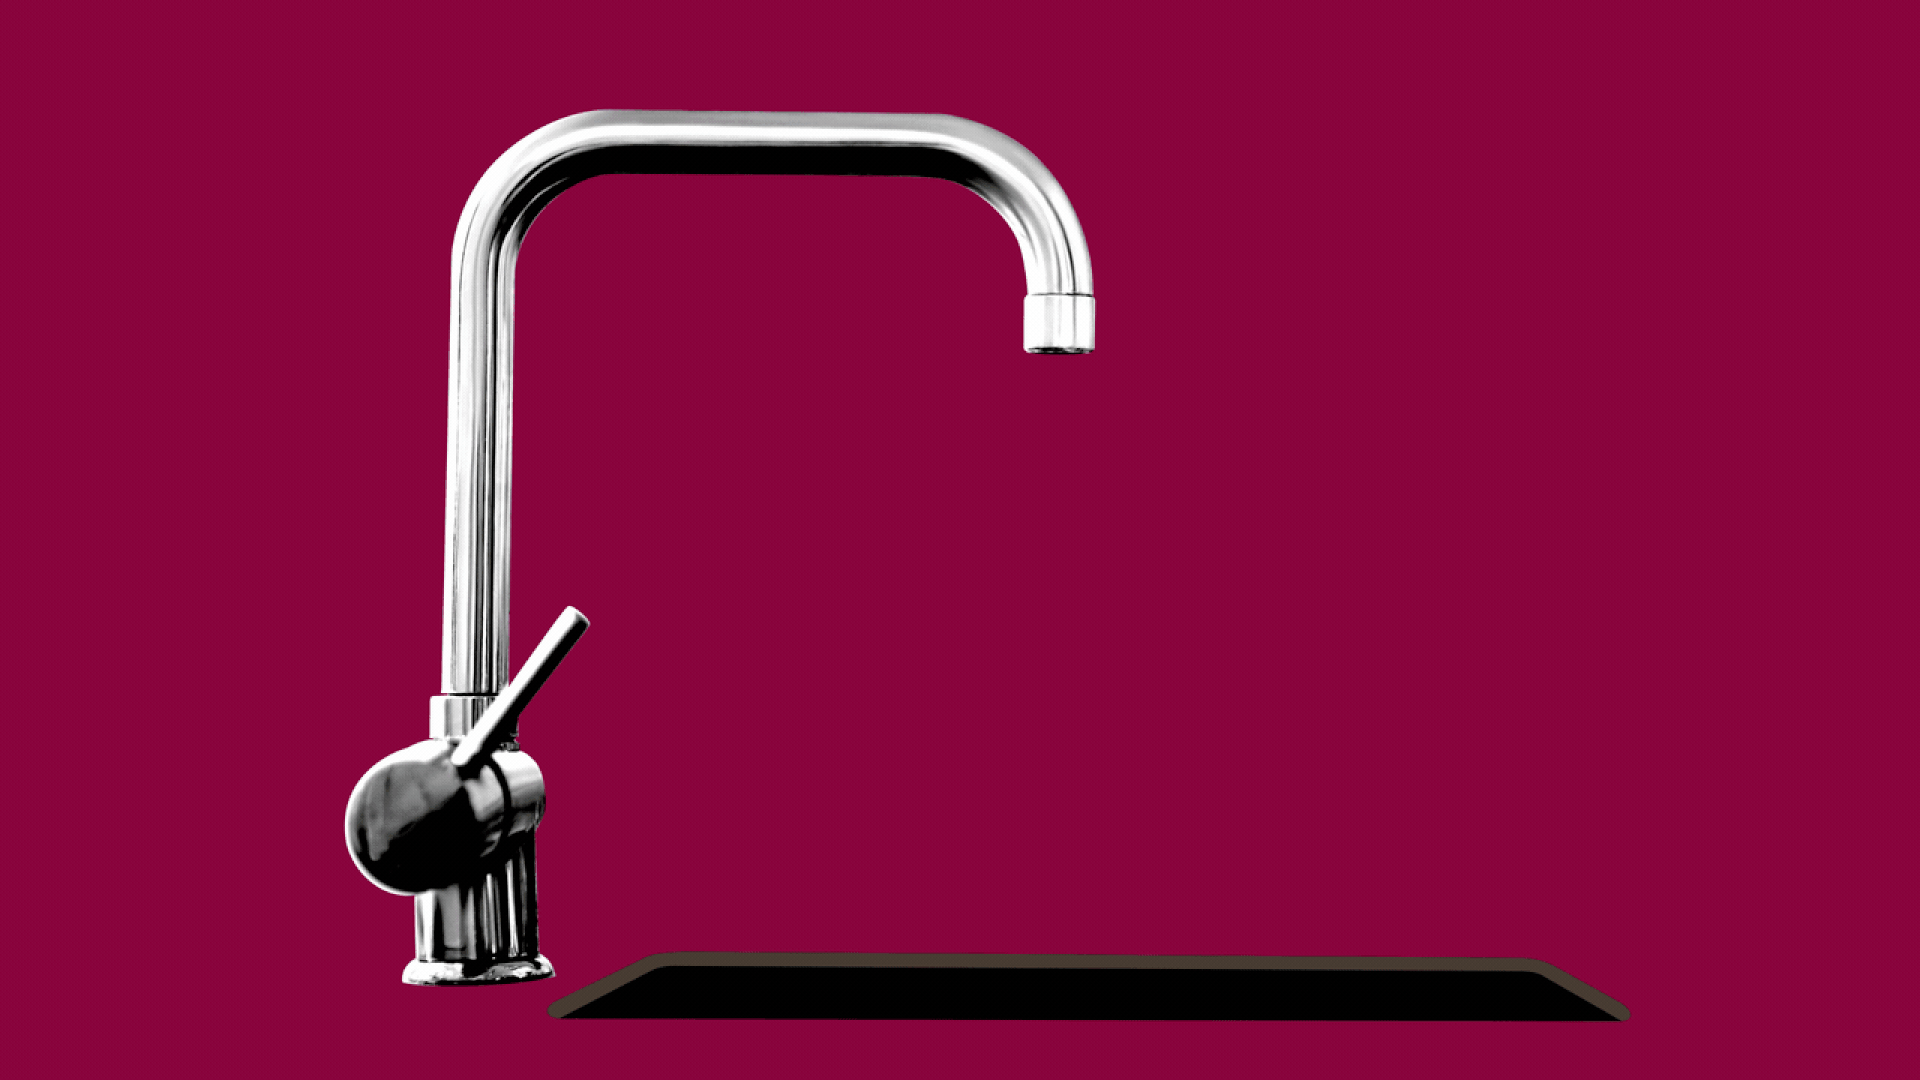 Illustration of a faucet with animated drips shaped like the letters N, W, and A falling out.